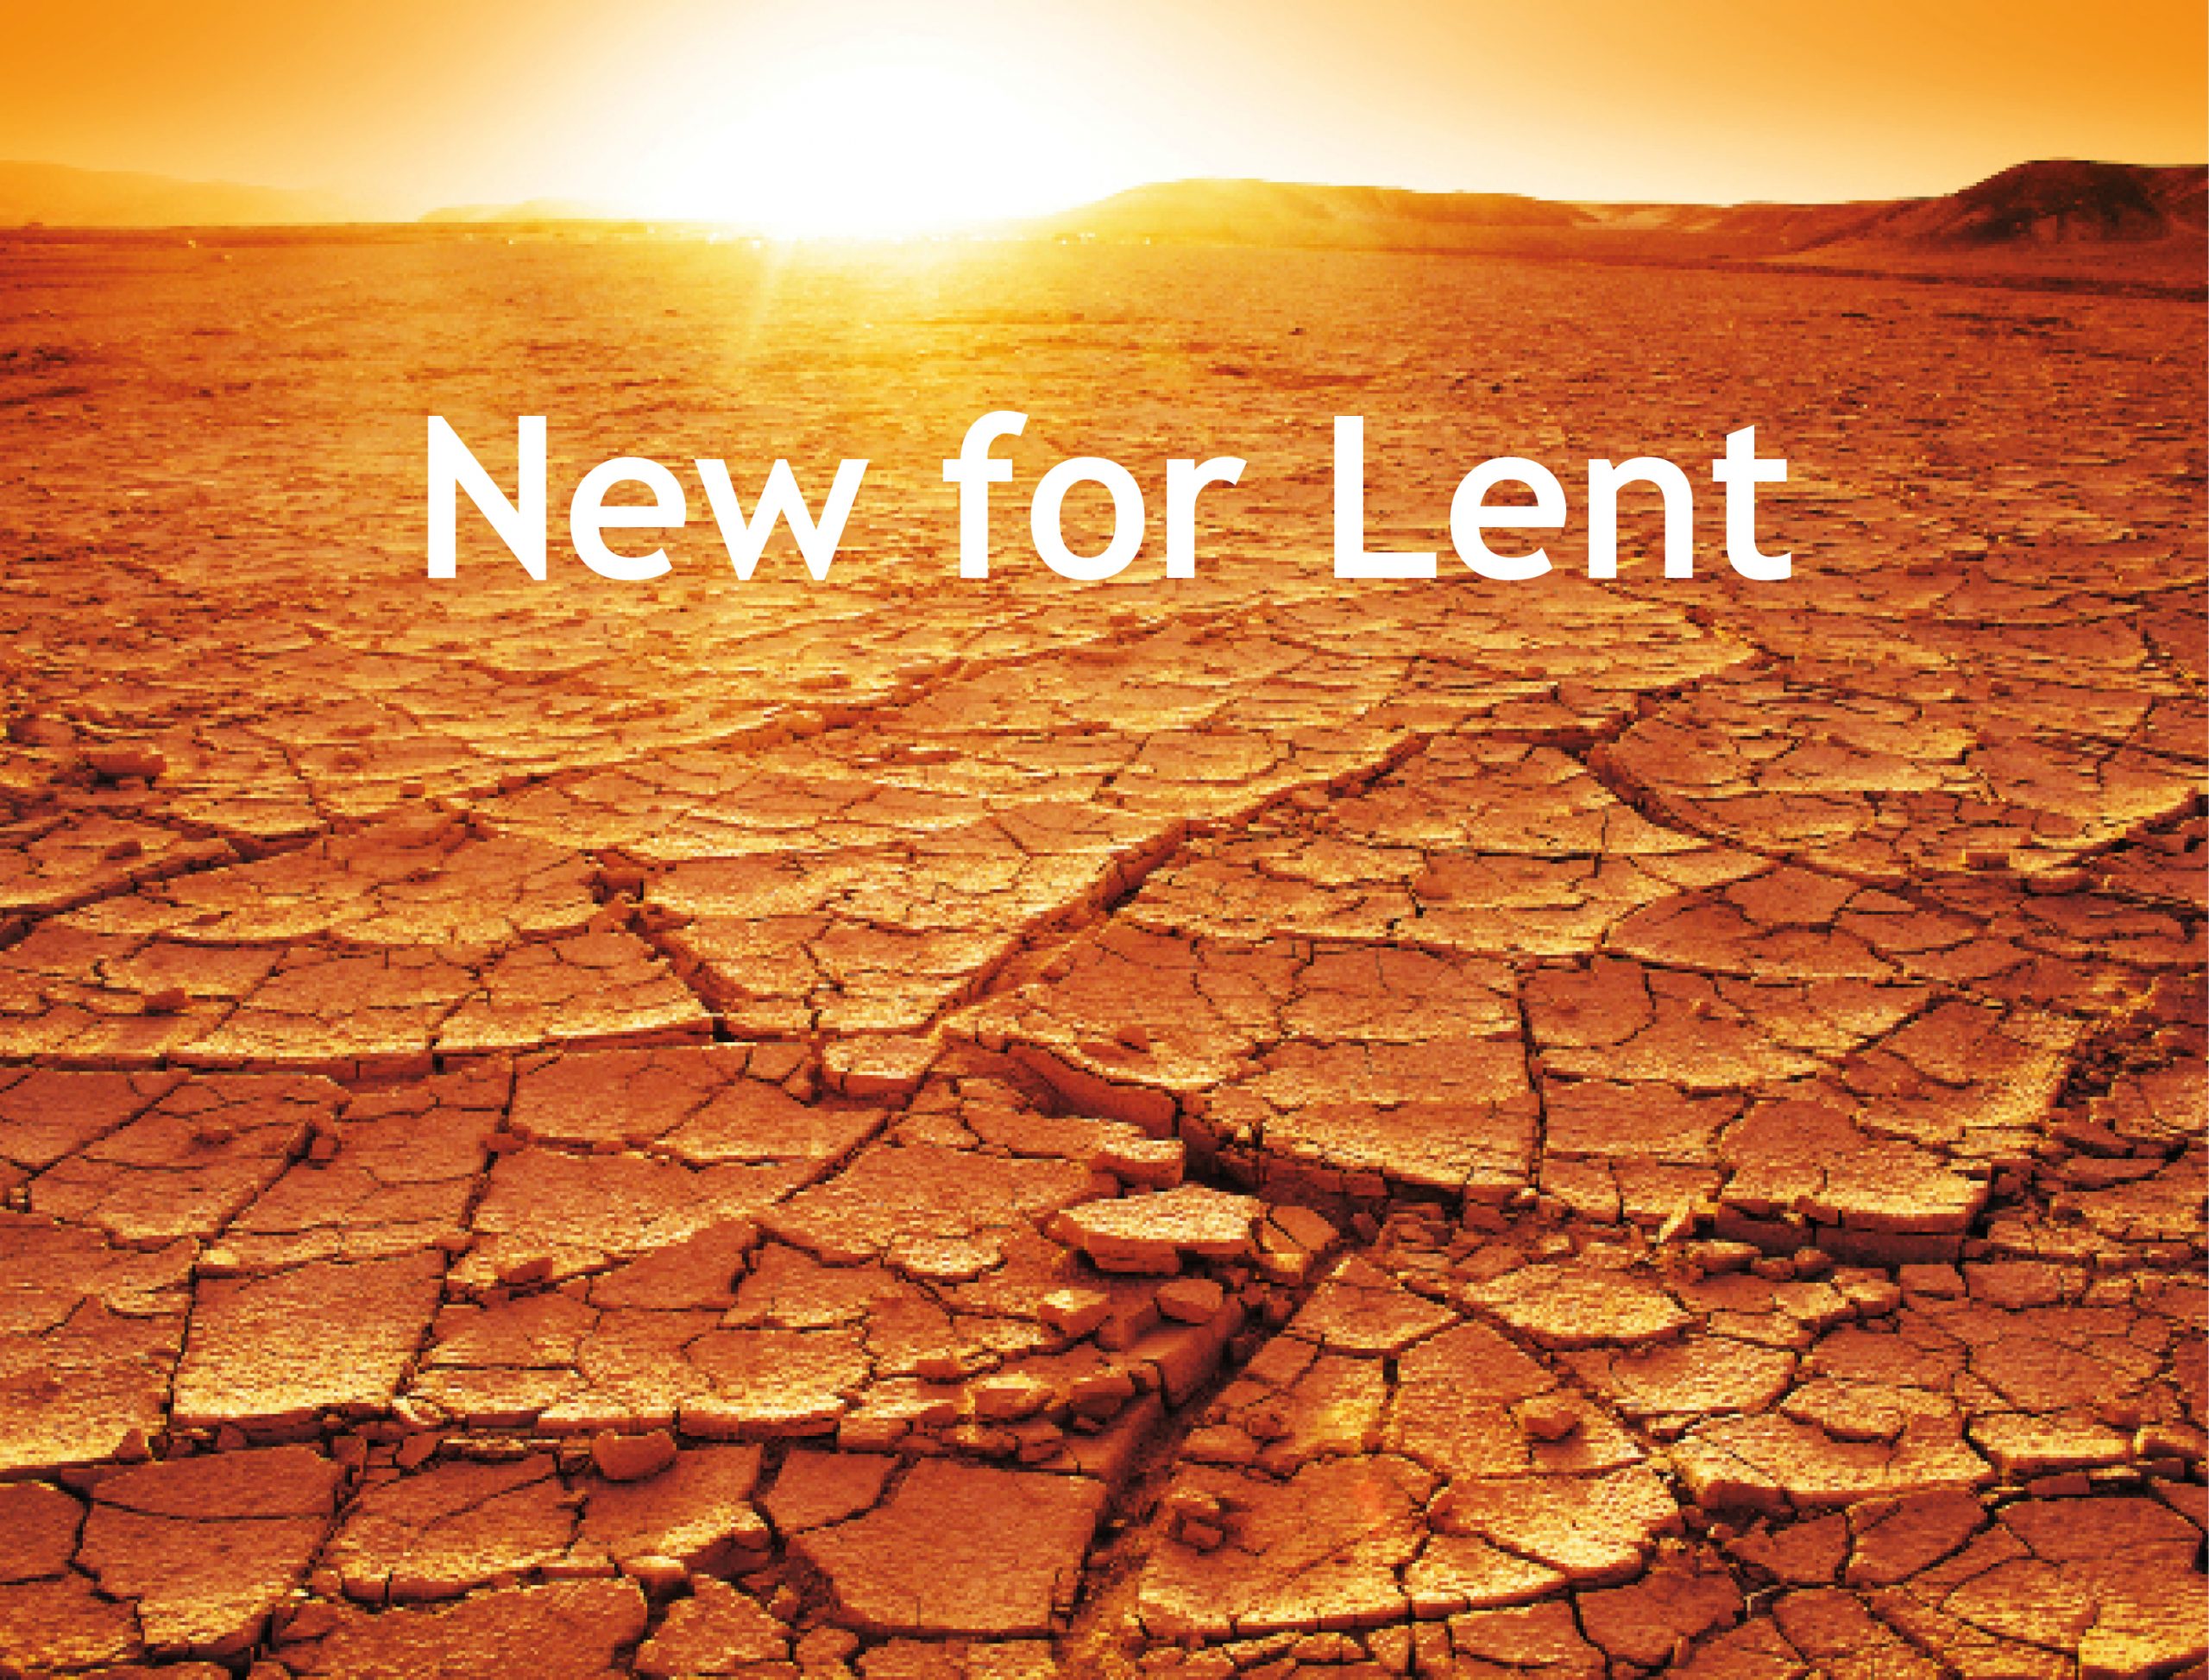 New book reviews for this Lent